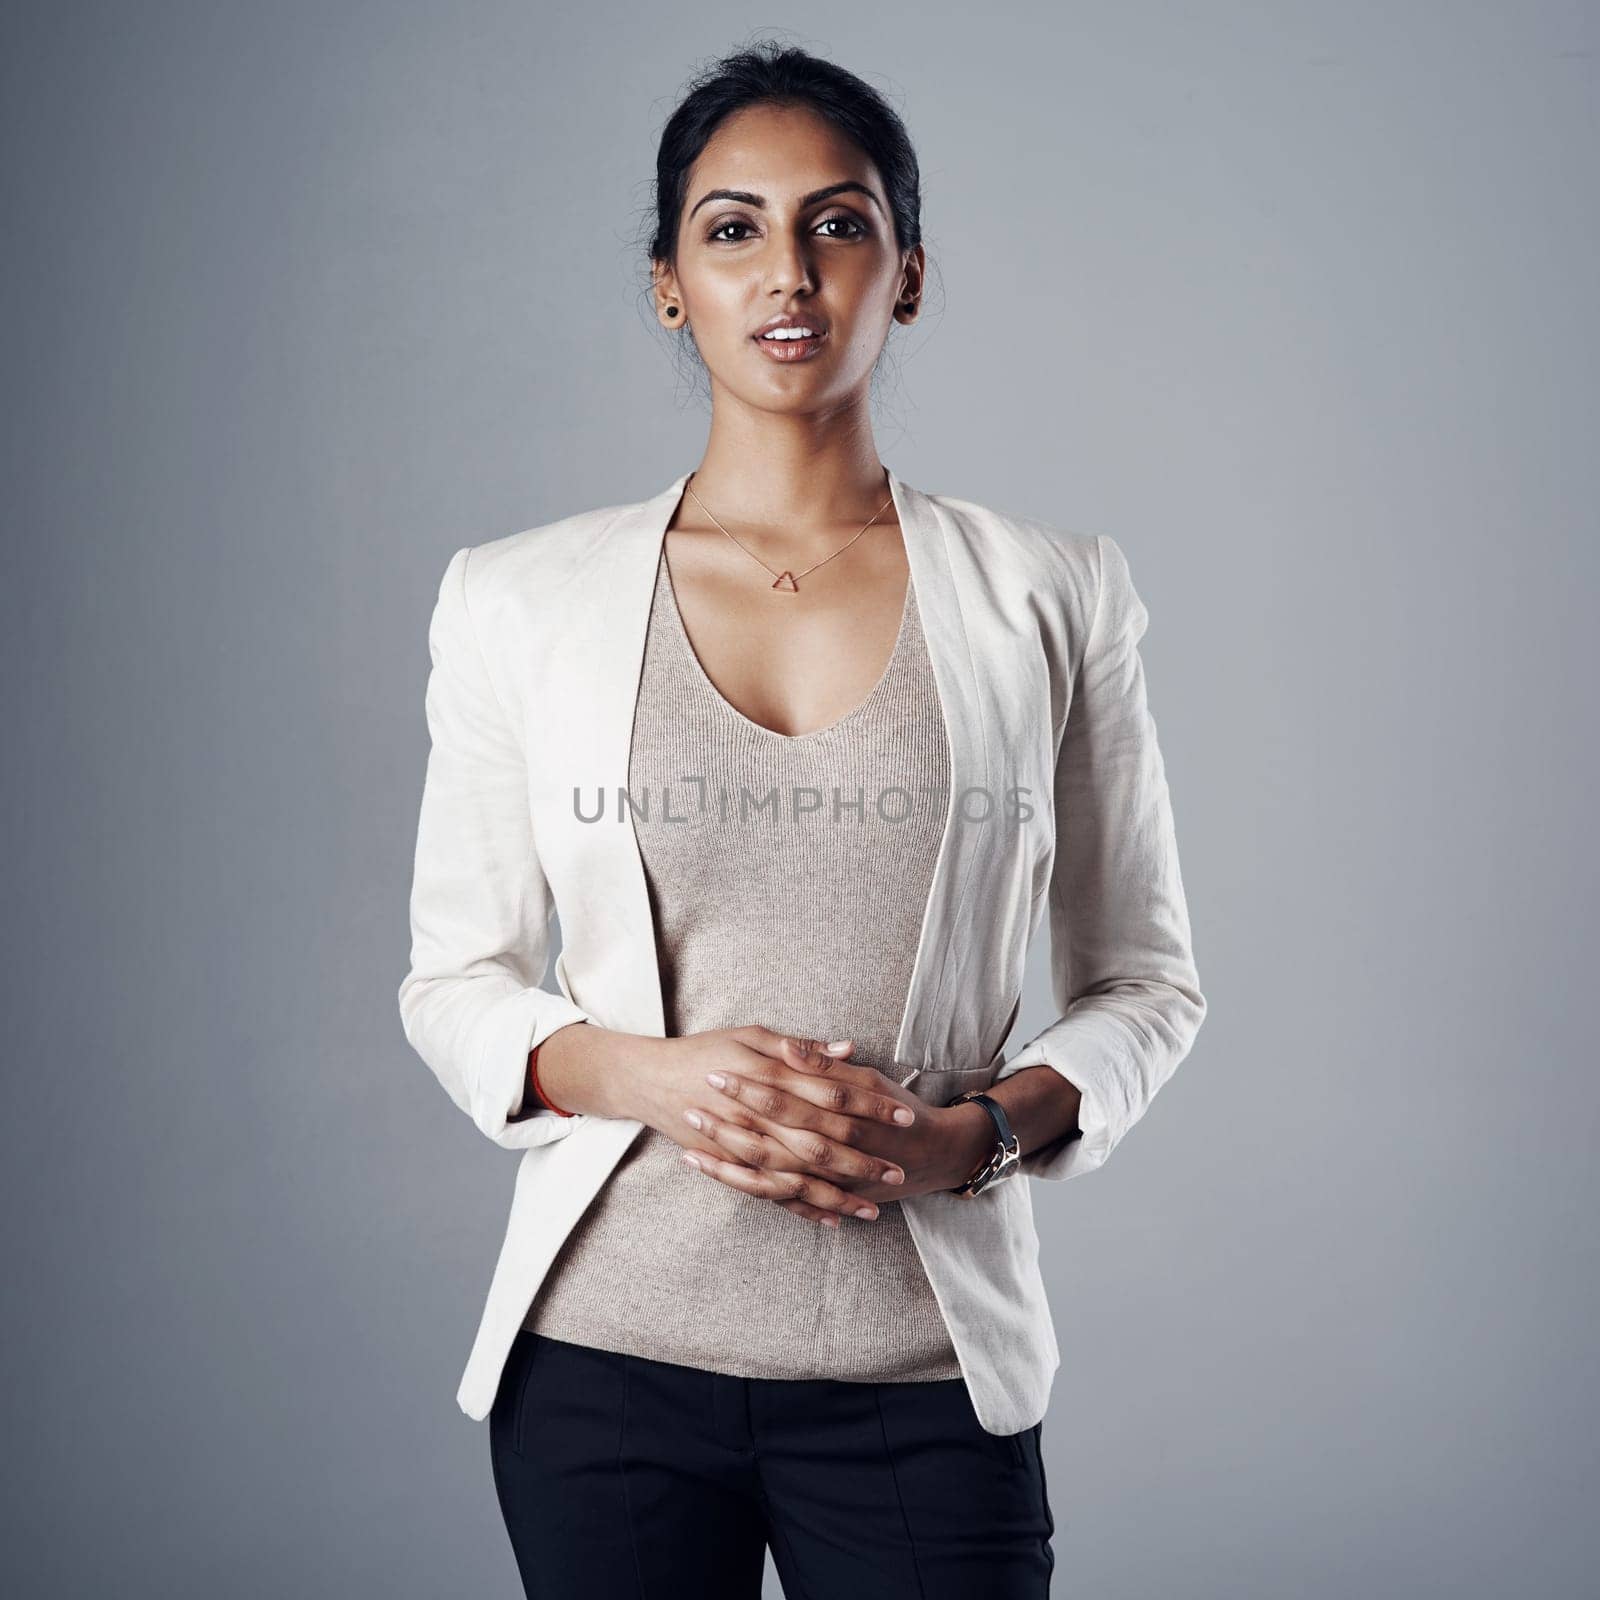 Staying firm in what I stand for. Studio portrait of a young businesswoman posing against a gray background